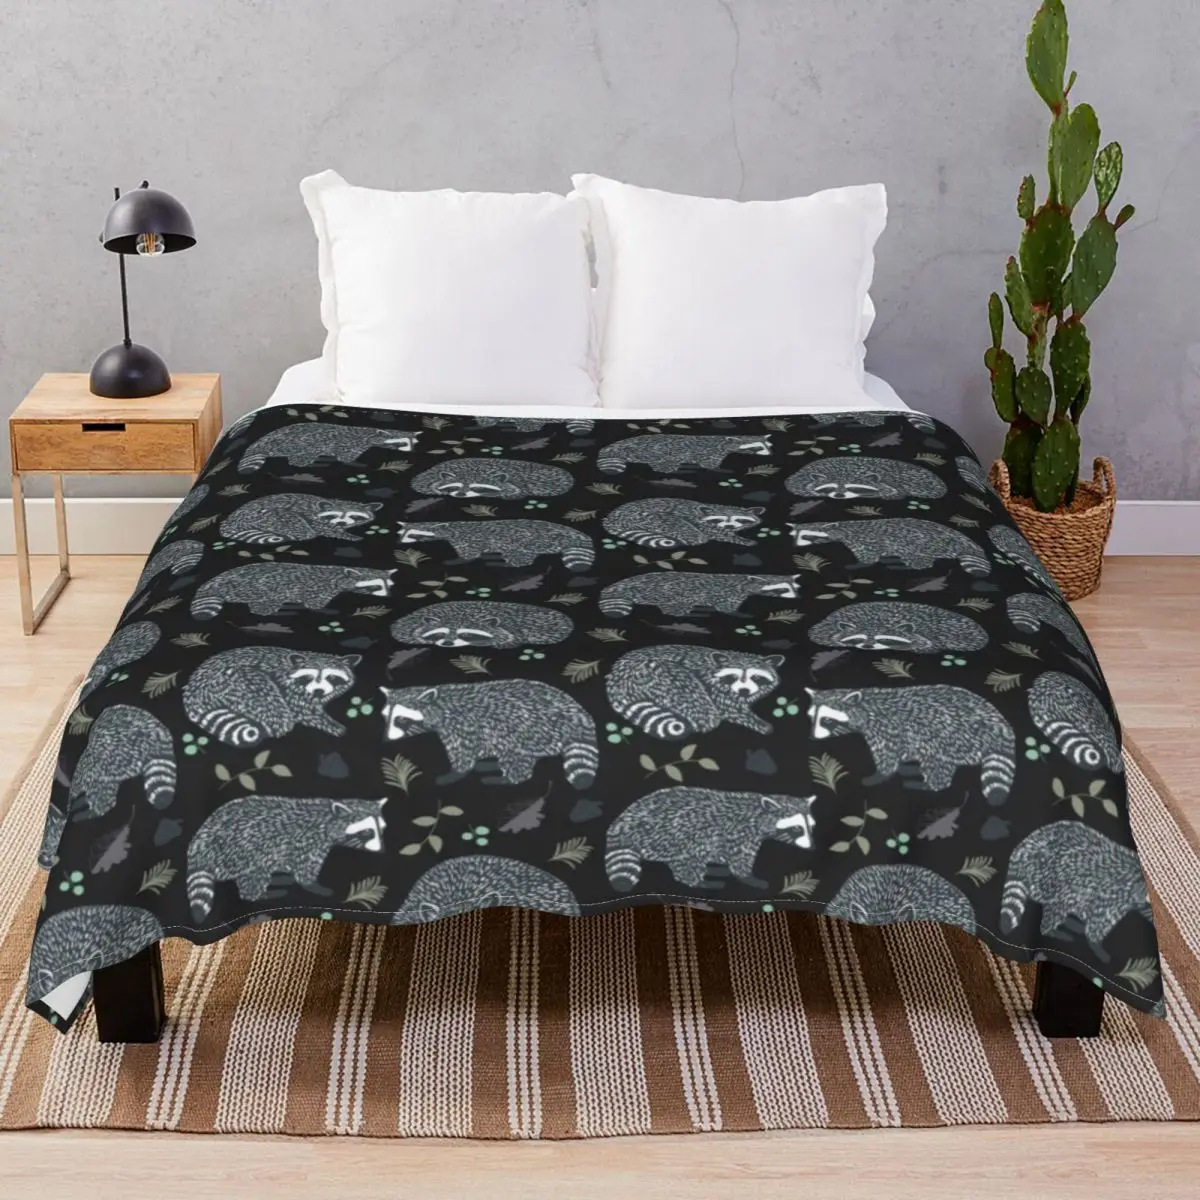 Raccoons Design Blanket Flannel Printed Breathable Throw Blankets for Bed Home Couch Travel Cinema